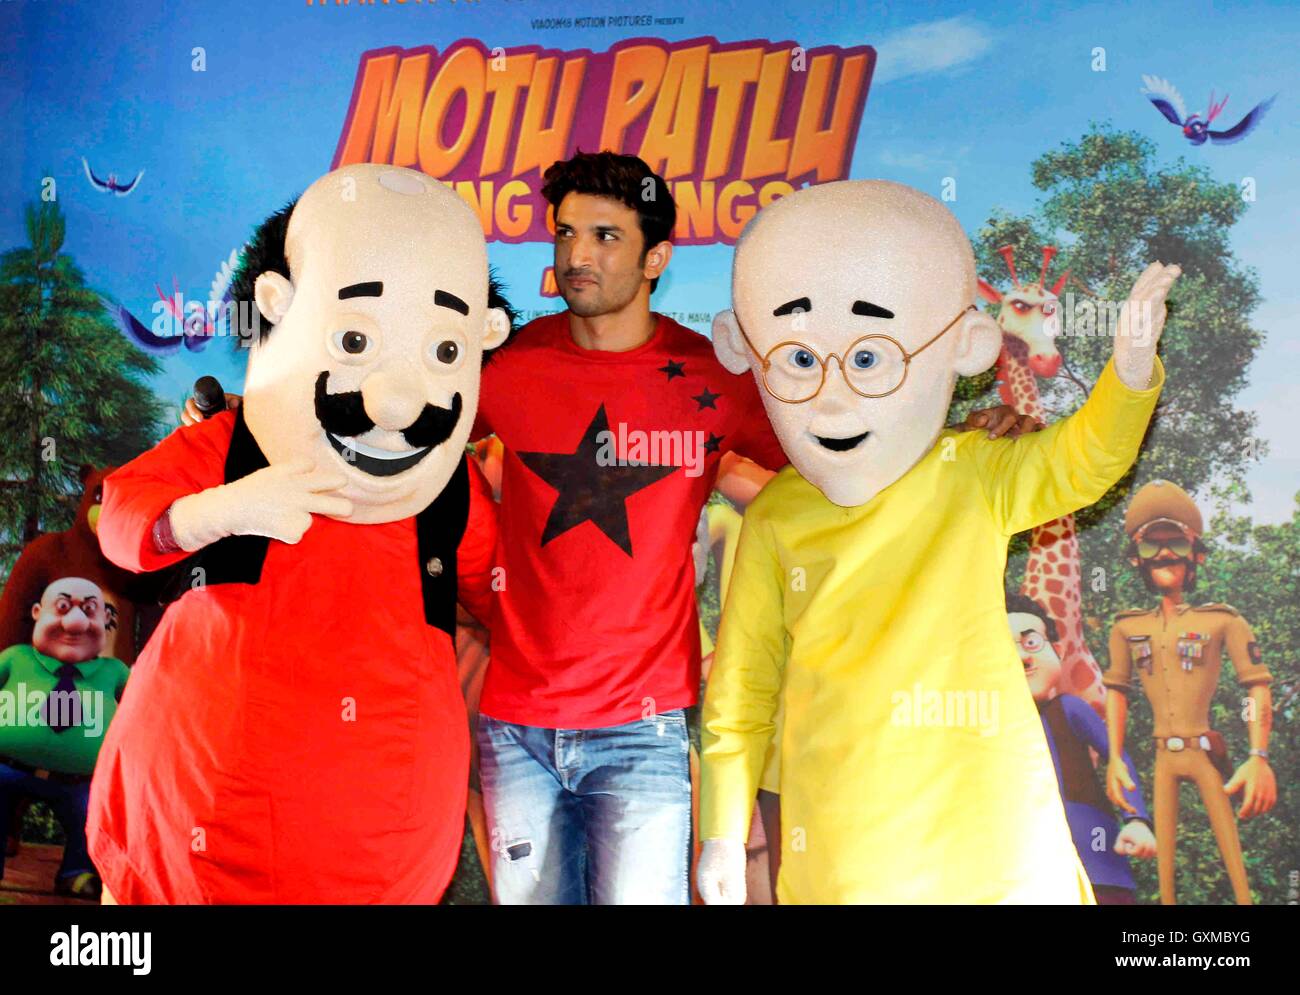 Sushant Singh Rajput ; Indian Bollywood actor at launch of first 3D  stereoscopic animated movie Motu Patlu King of Kings in Mumbai India Asia  Stock Photo - Alamy